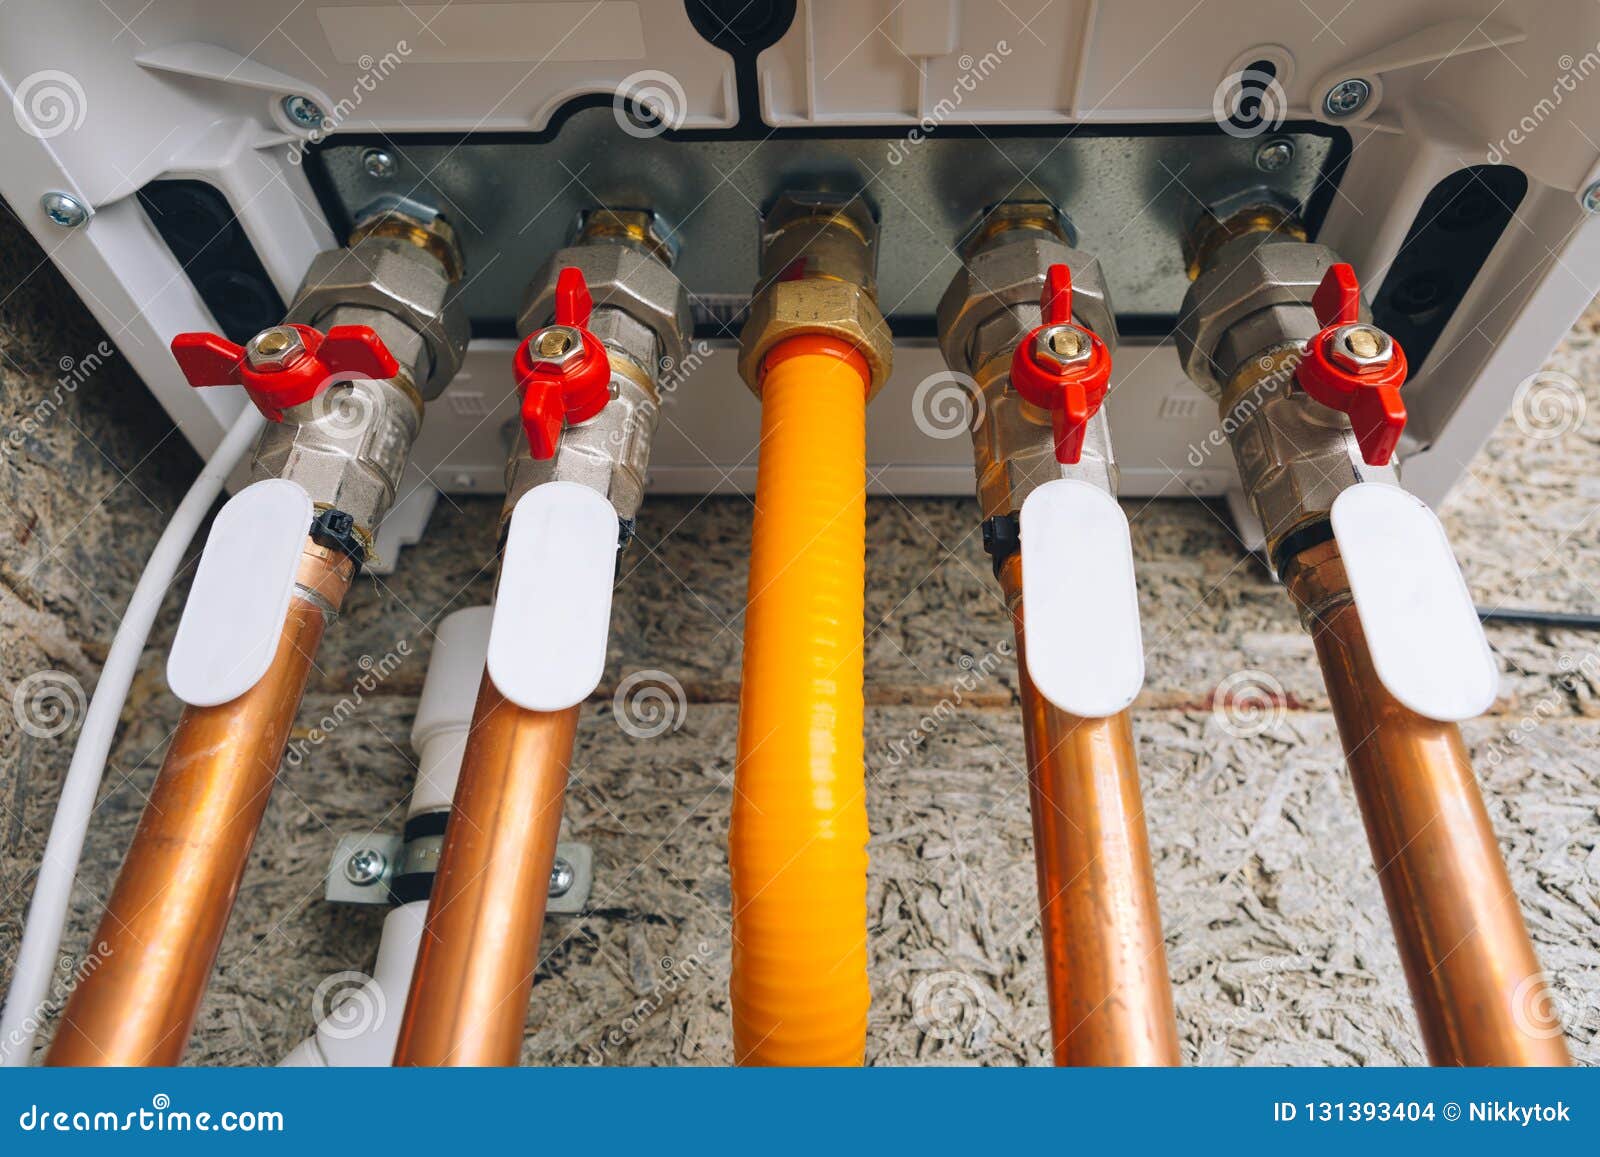 modern gas boiler bottom piping, independent heating system, close-up view